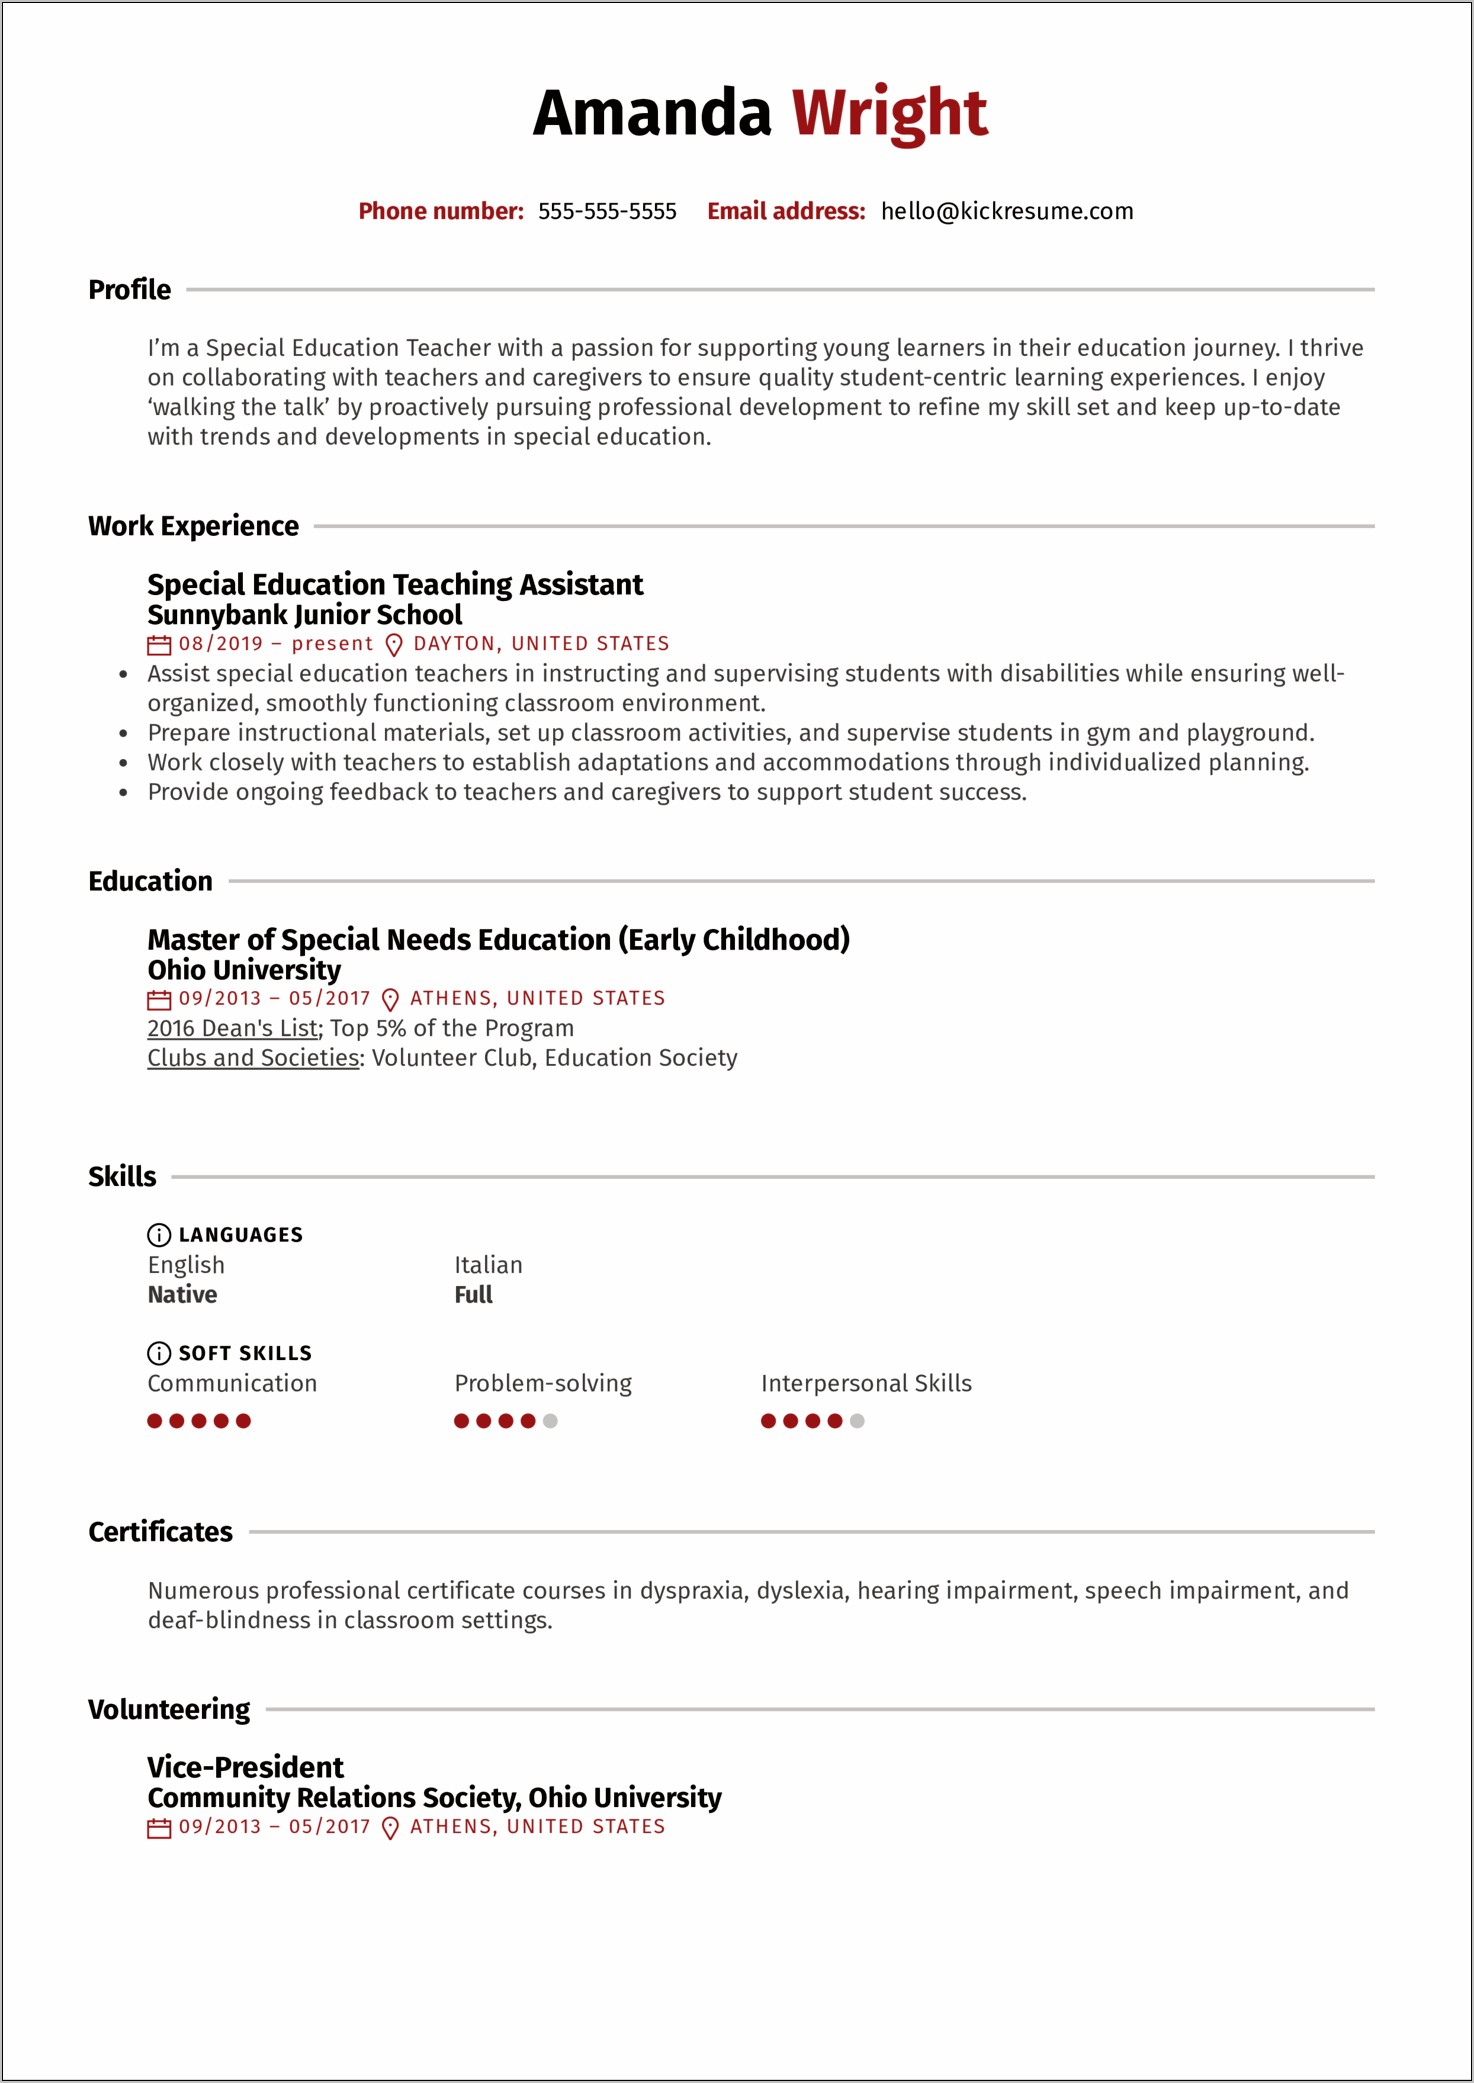 Samples Of Special Education Teacher Resumes